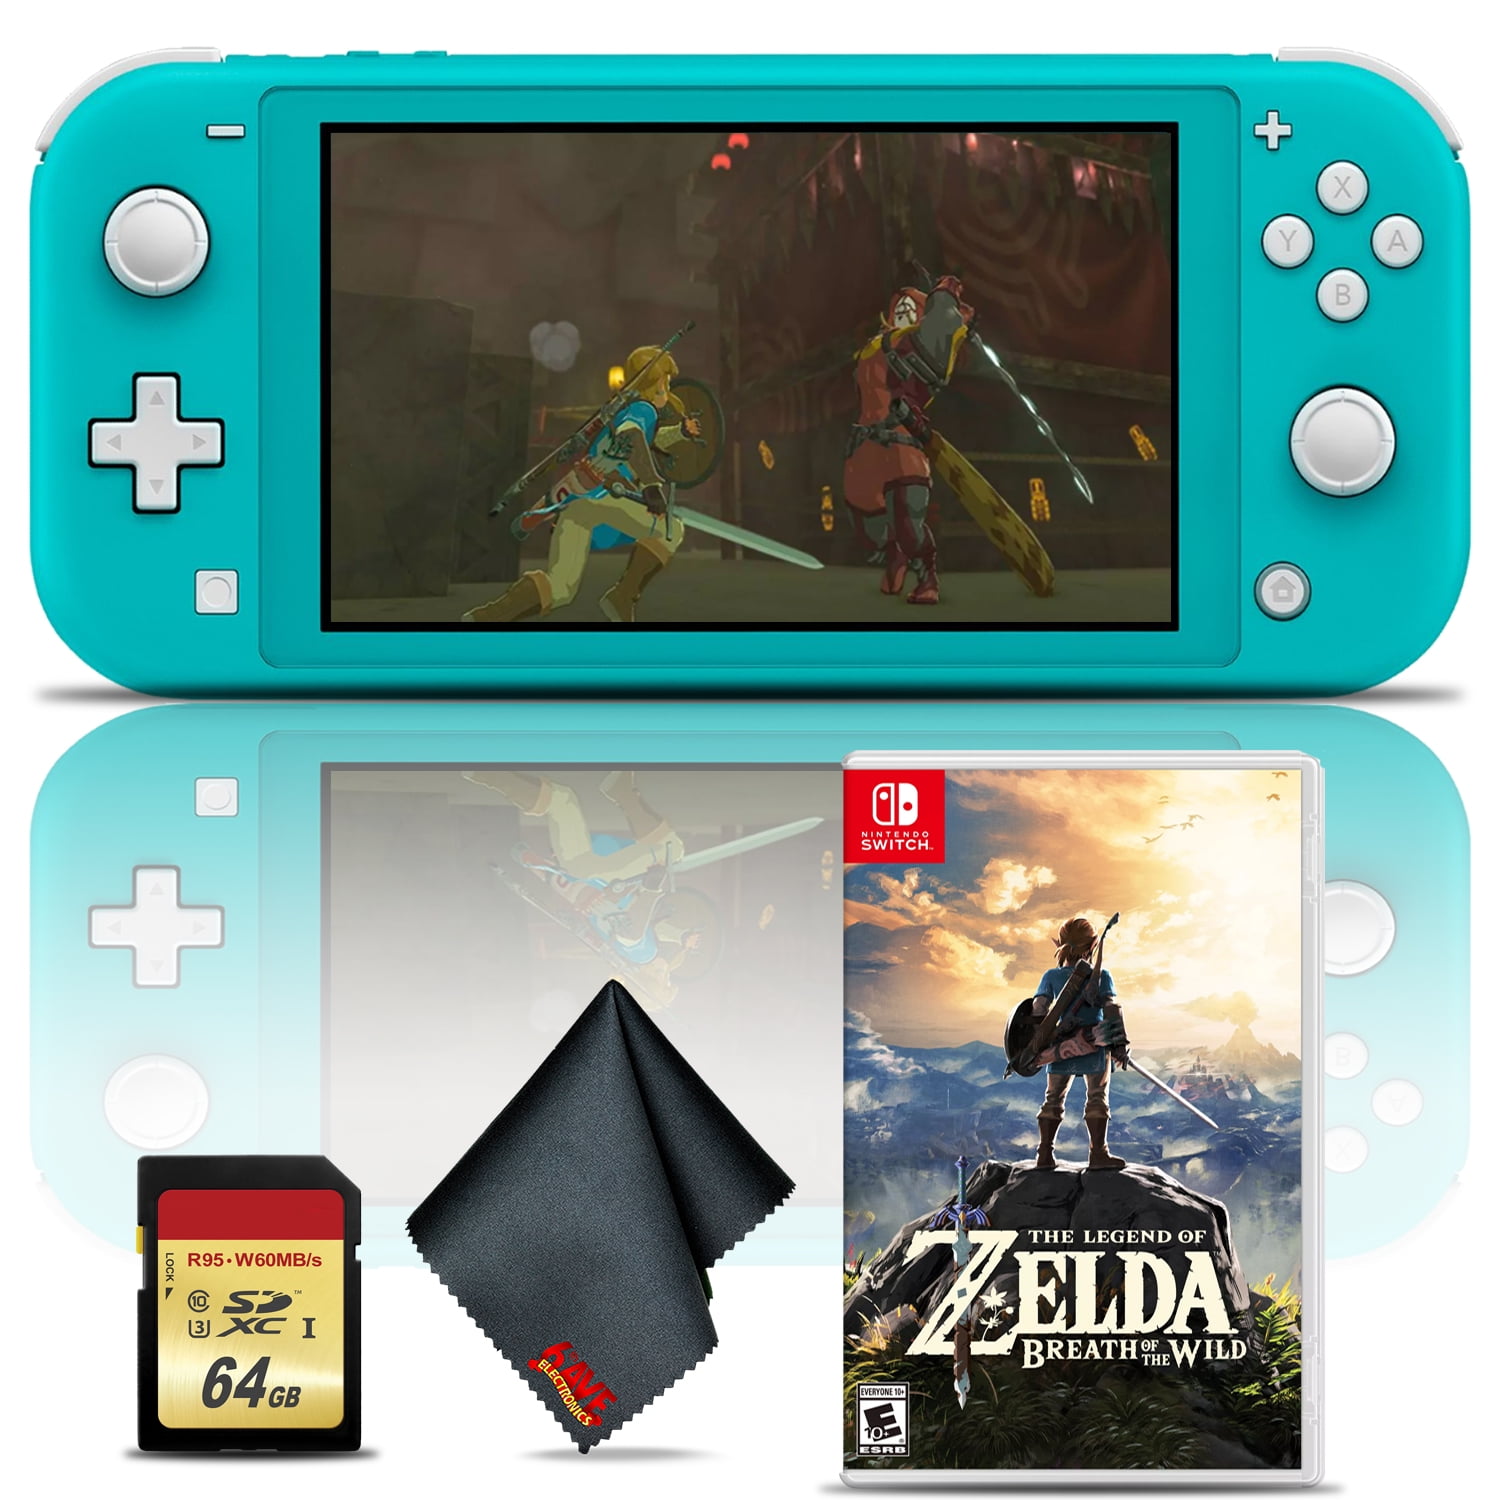 Nintendo Switch Lite (Coral) with Zelda: Breath of the Wild and